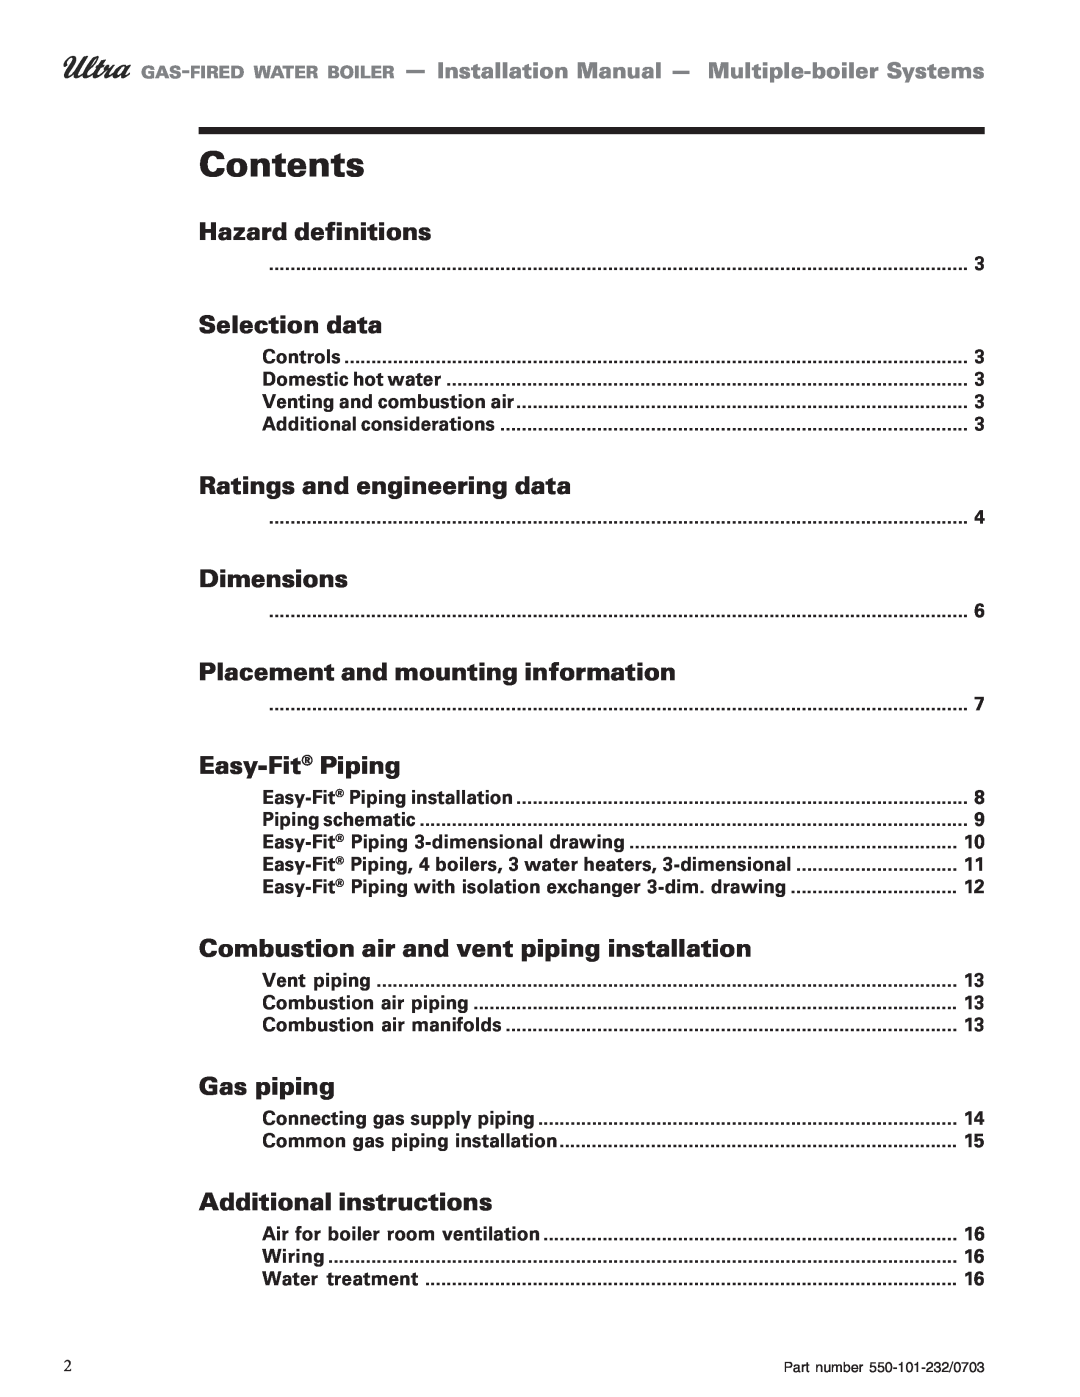 Weil-McLain Boiler Contents, Hazard definitions, Selection data, Ratings and engineering data, Dimensions, Easy-Fit Piping 